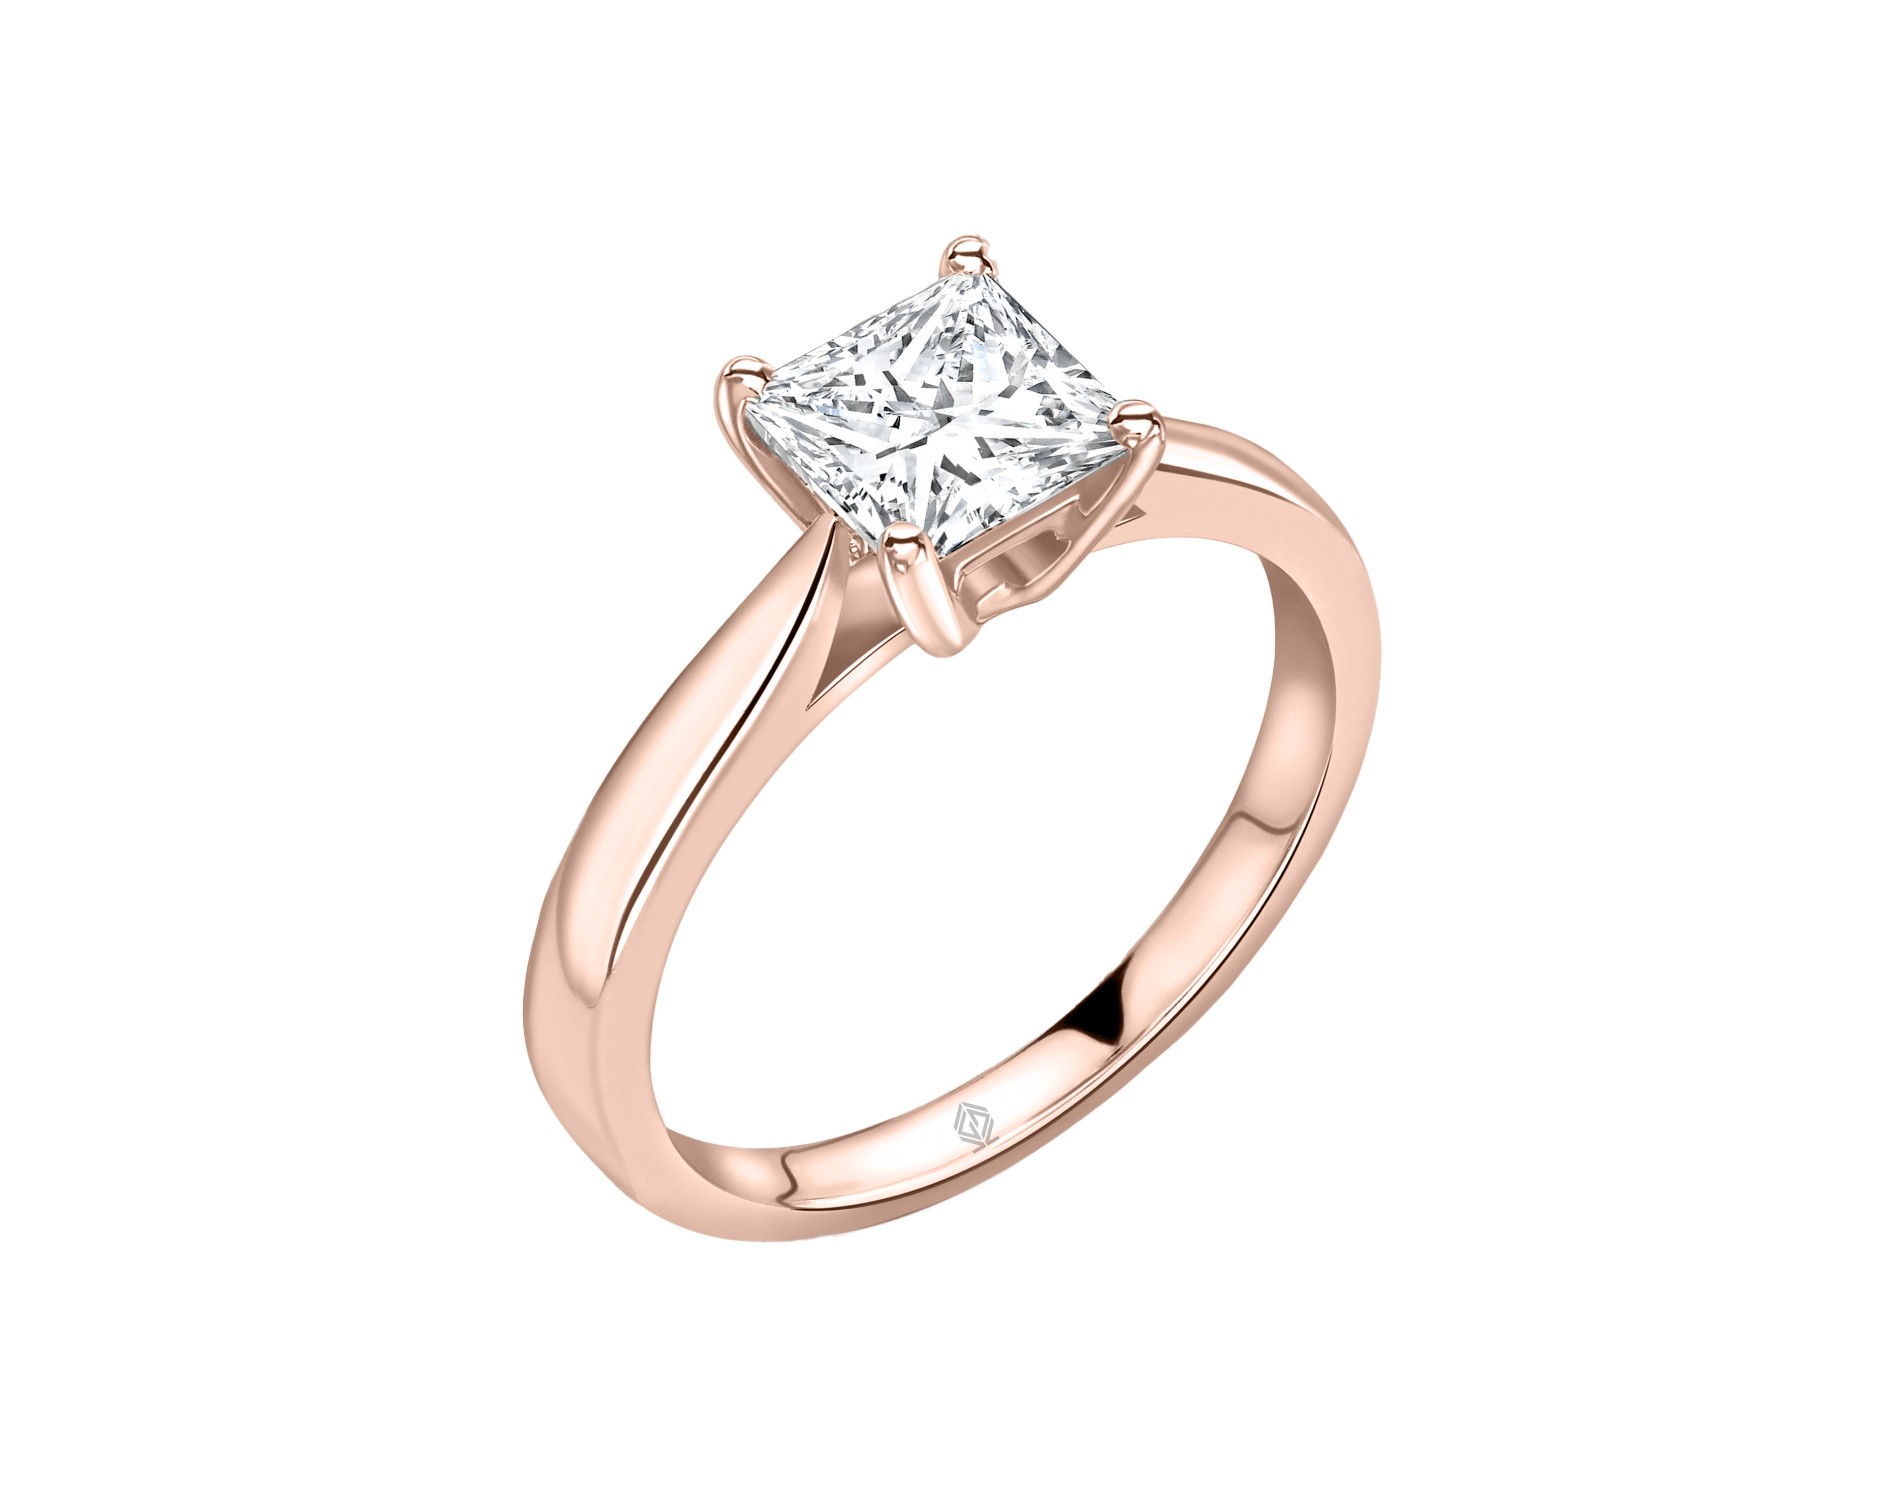 18K ROSE GOLD GOLD 4 PRONGS SOLITAIRE PRINCESS CUT DIAMOND ENGAGEMENT RING